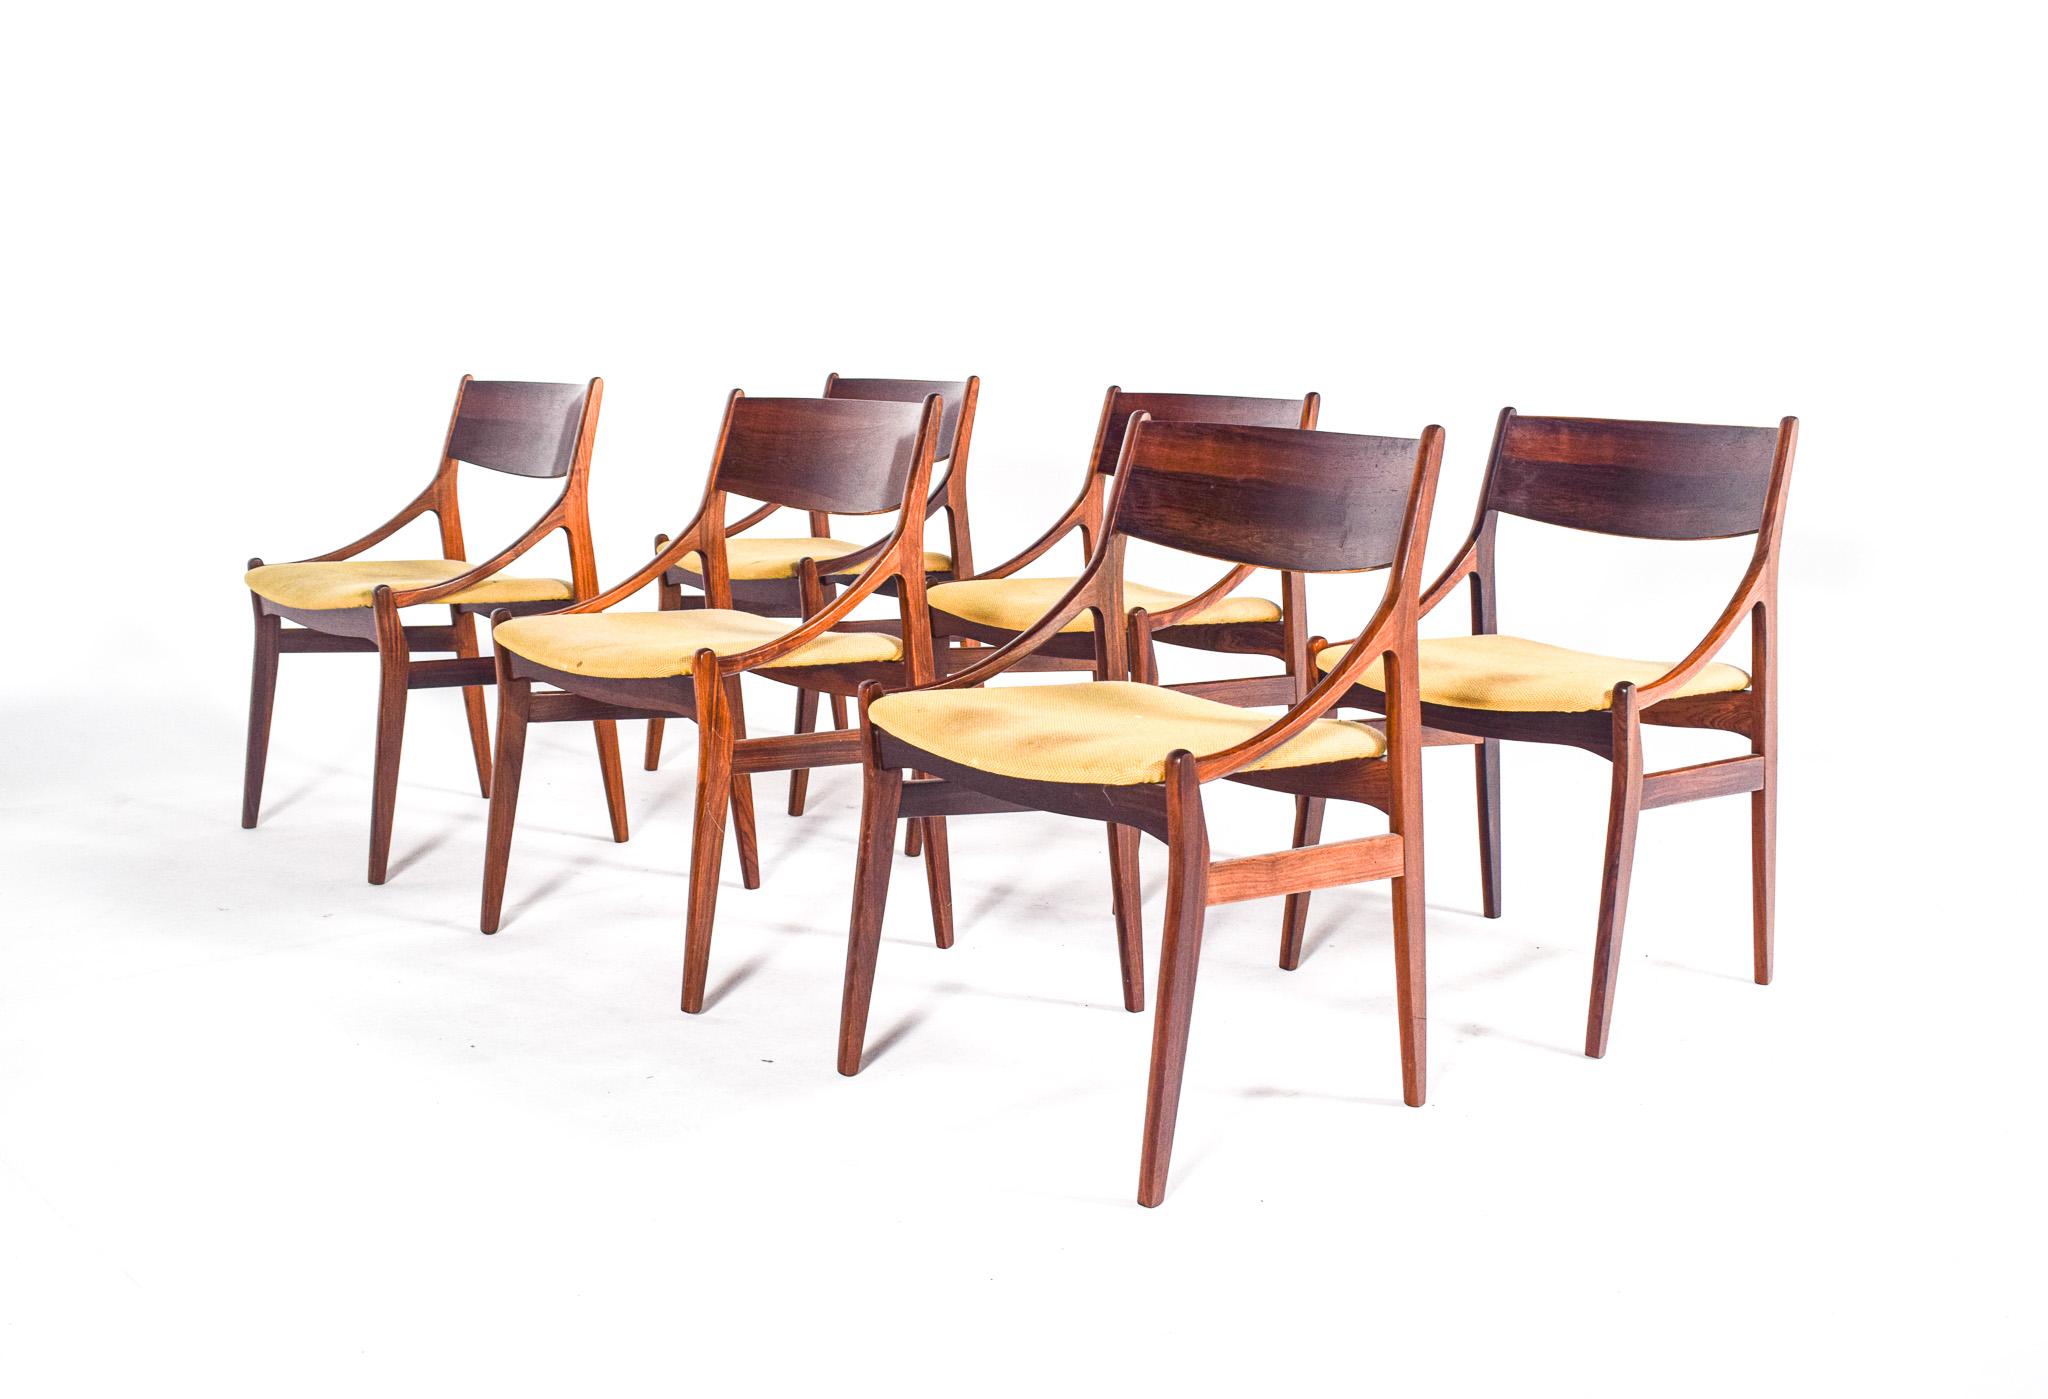 This midcentury set of six dining chairs, designed by Vestervig Erikson for Brdr Tromborg Lystrup, is a quintessential example of 1960s Danish furniture design. Crafted from rosewood, these chairs boast a striking veneer that showcases the intricate